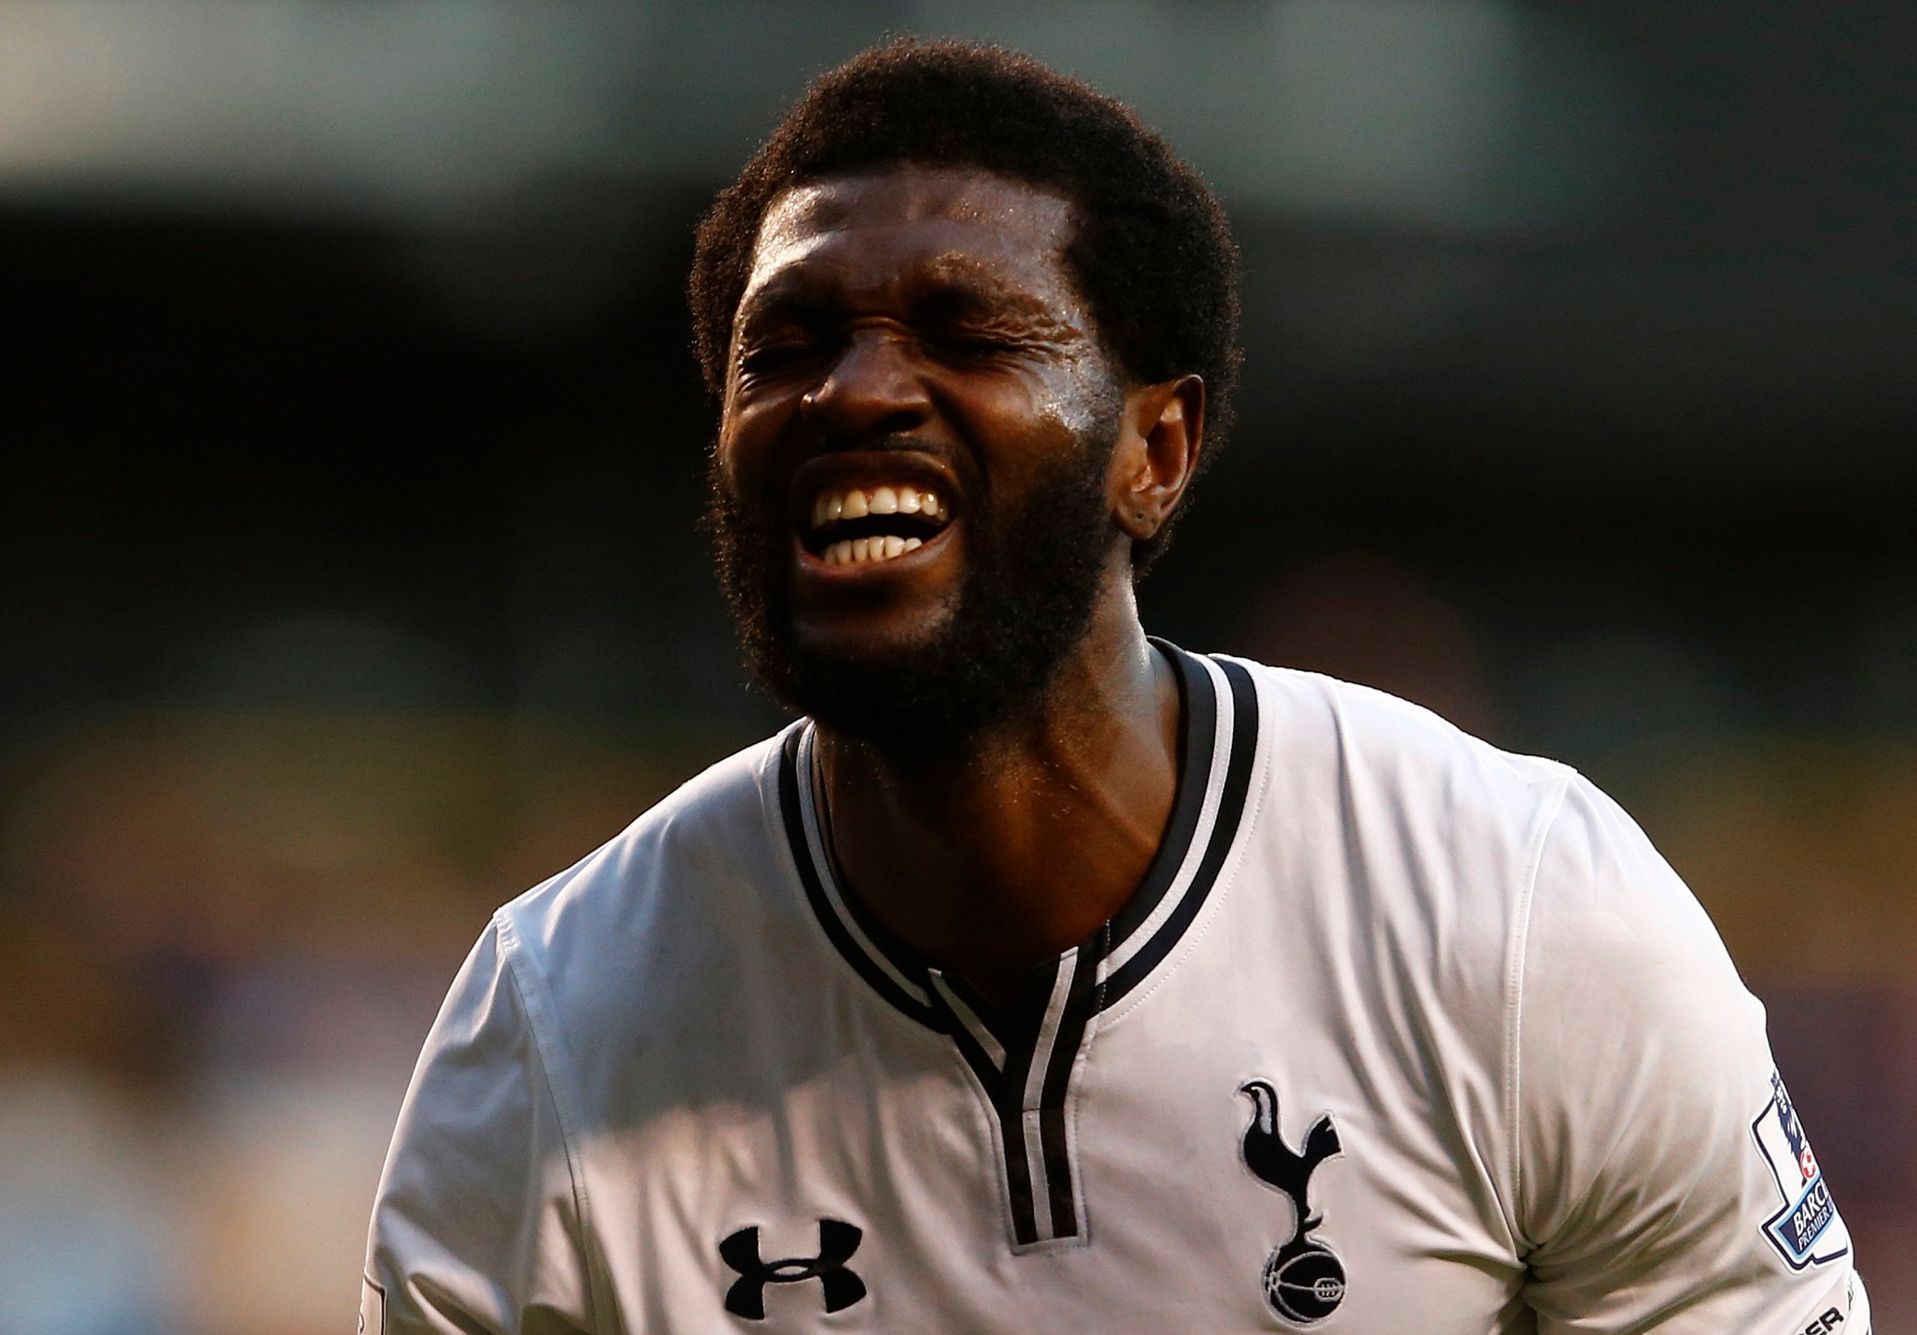 Tottenham Hotspur's Adebayor reacts after missing a chance to score against Arsenal during their English Premier League soccer match in London